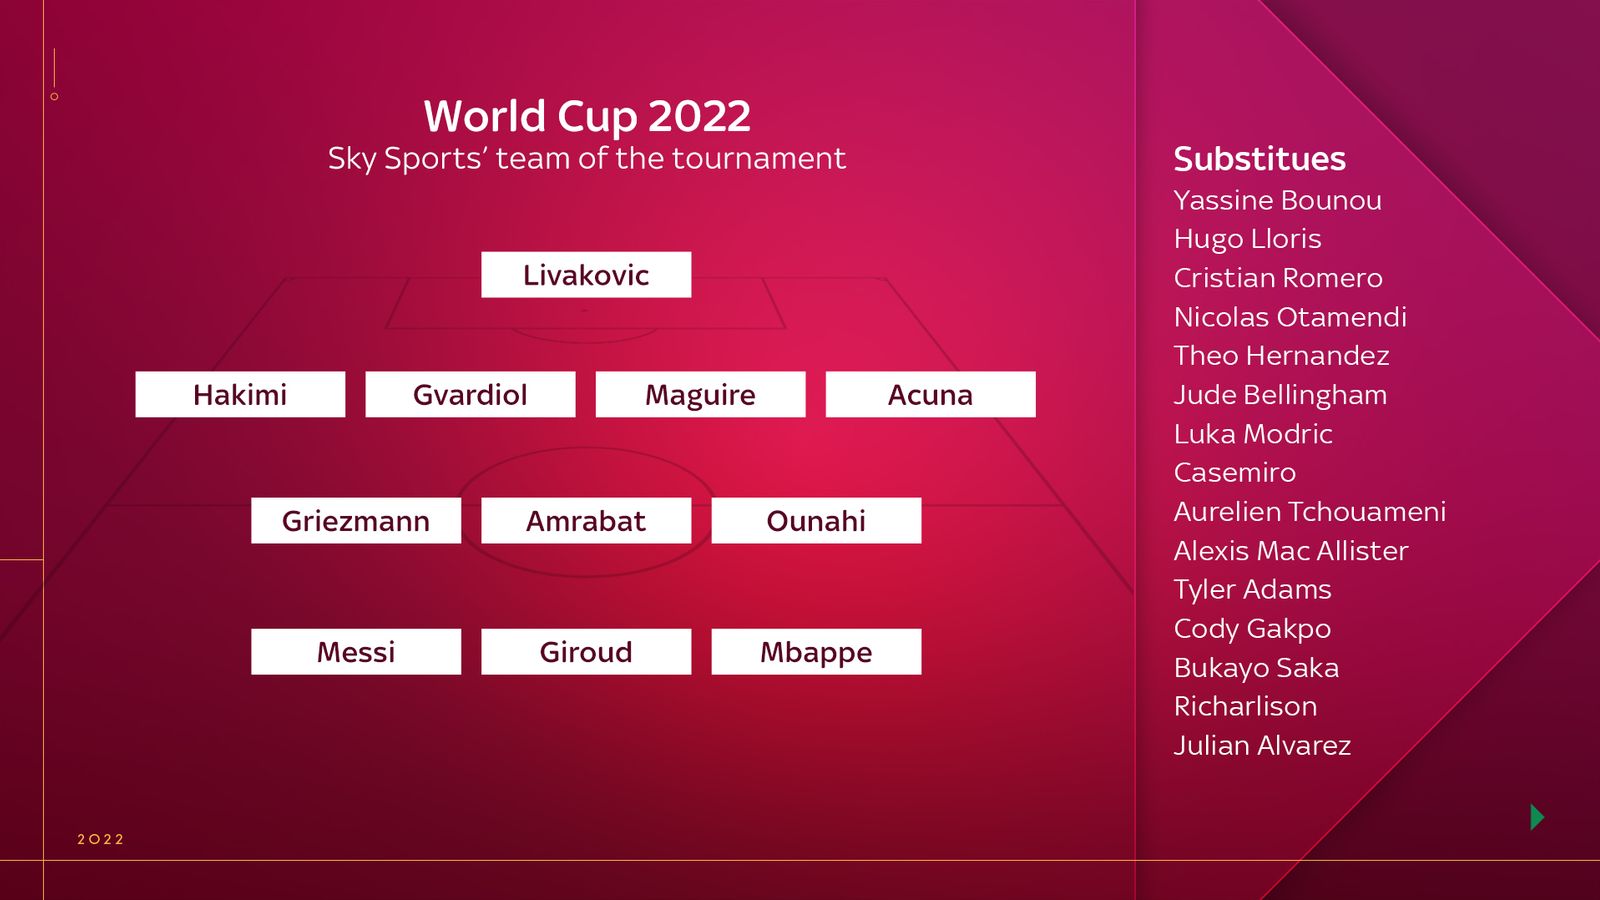 skysports-world-cup-team-of-the-tournament_5997576.jpg